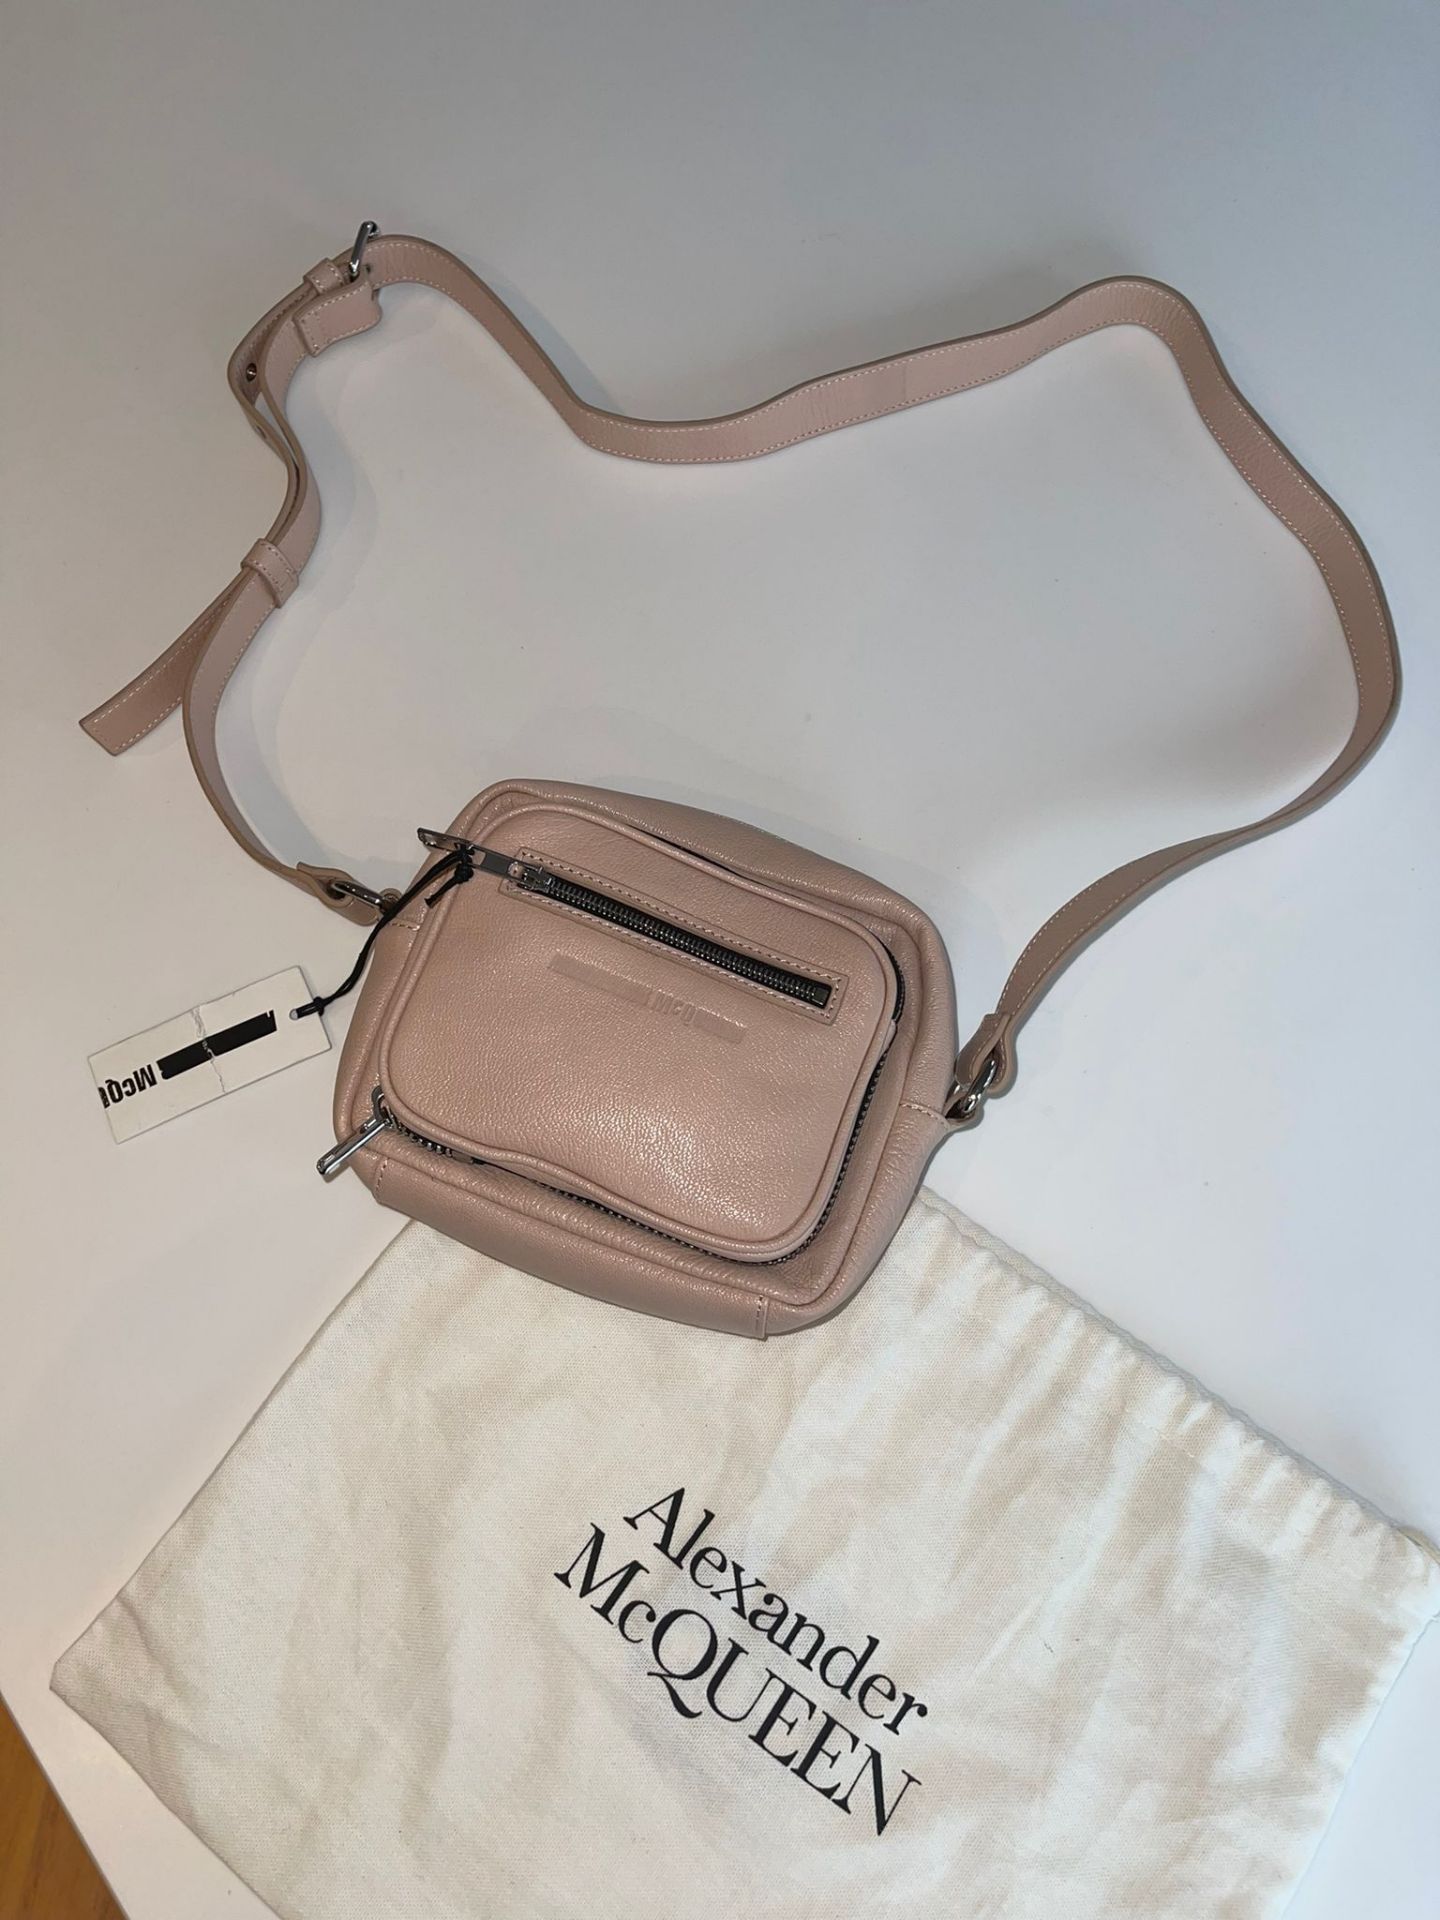 Alexander Mcqueen Small Crossbody Satchel Bag in Nude. Small defect on the Zipper. RRP £450 - Image 5 of 5